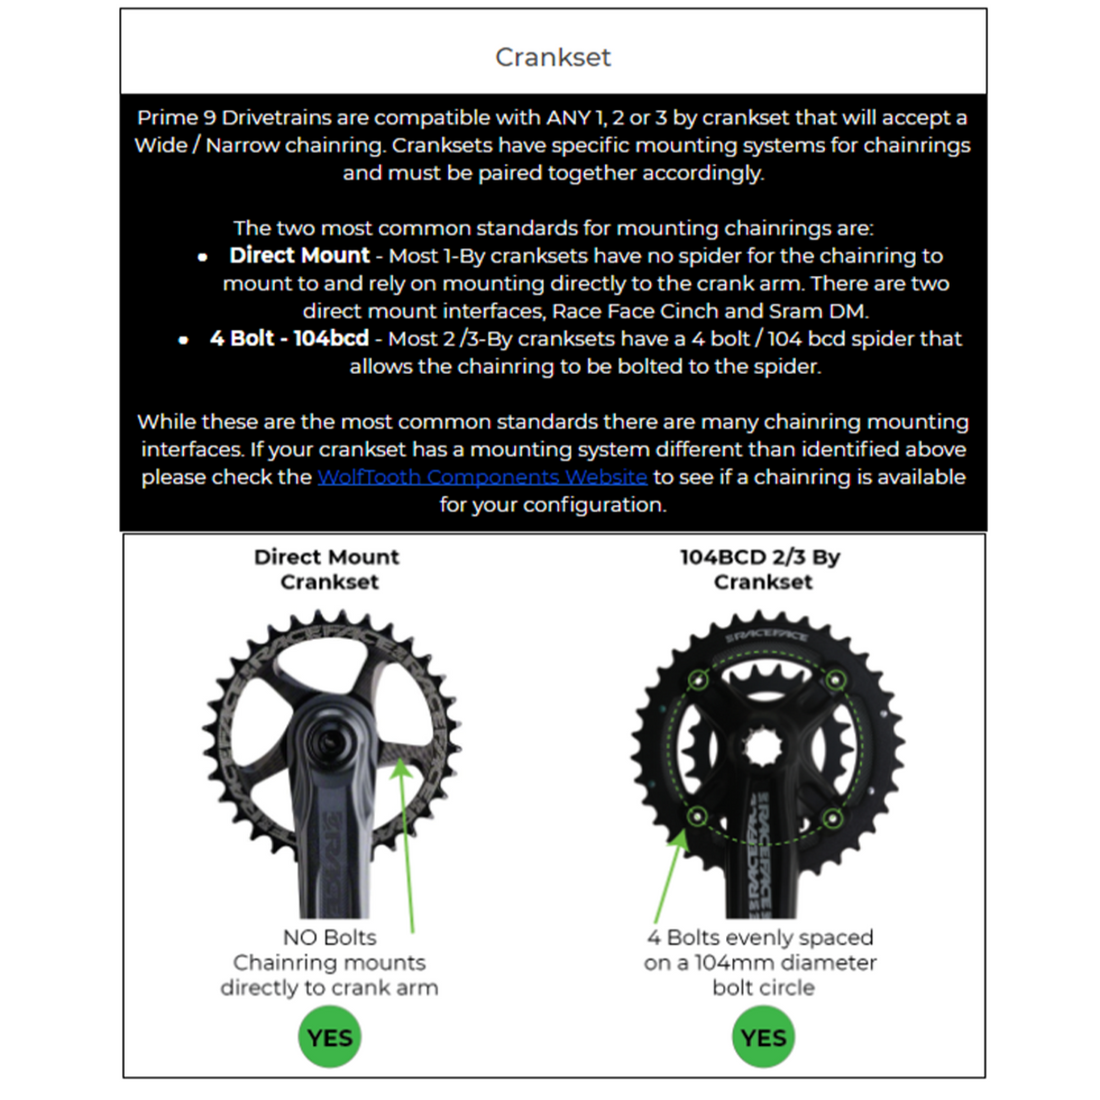 BOX COMPONENTS - WOLF TOOTH 104 BCD CHAINRINGS